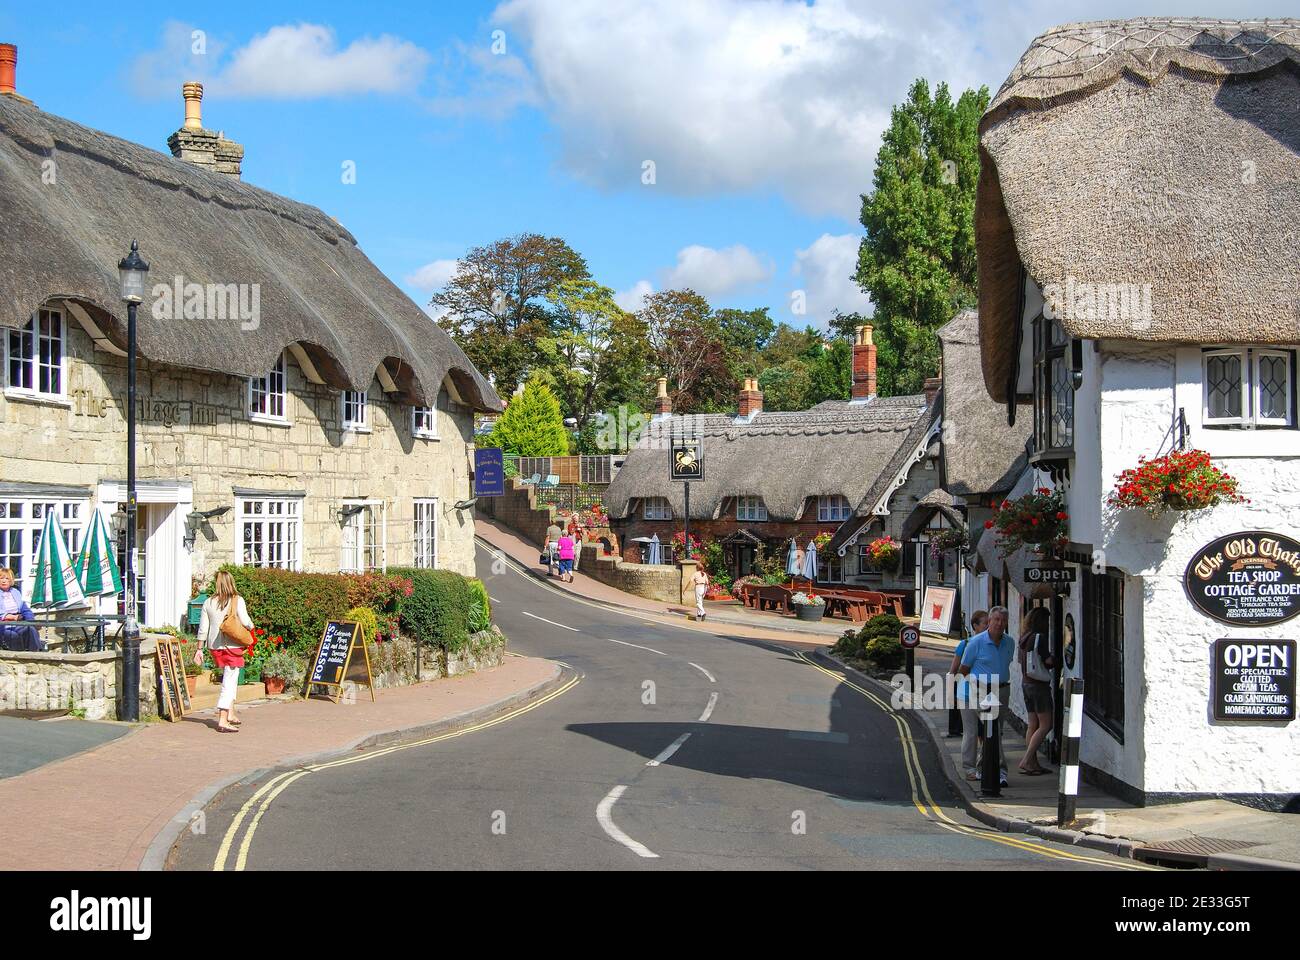 Old Town, Shanklin, Isle of Wight, England, United Kingdom Stock Photo